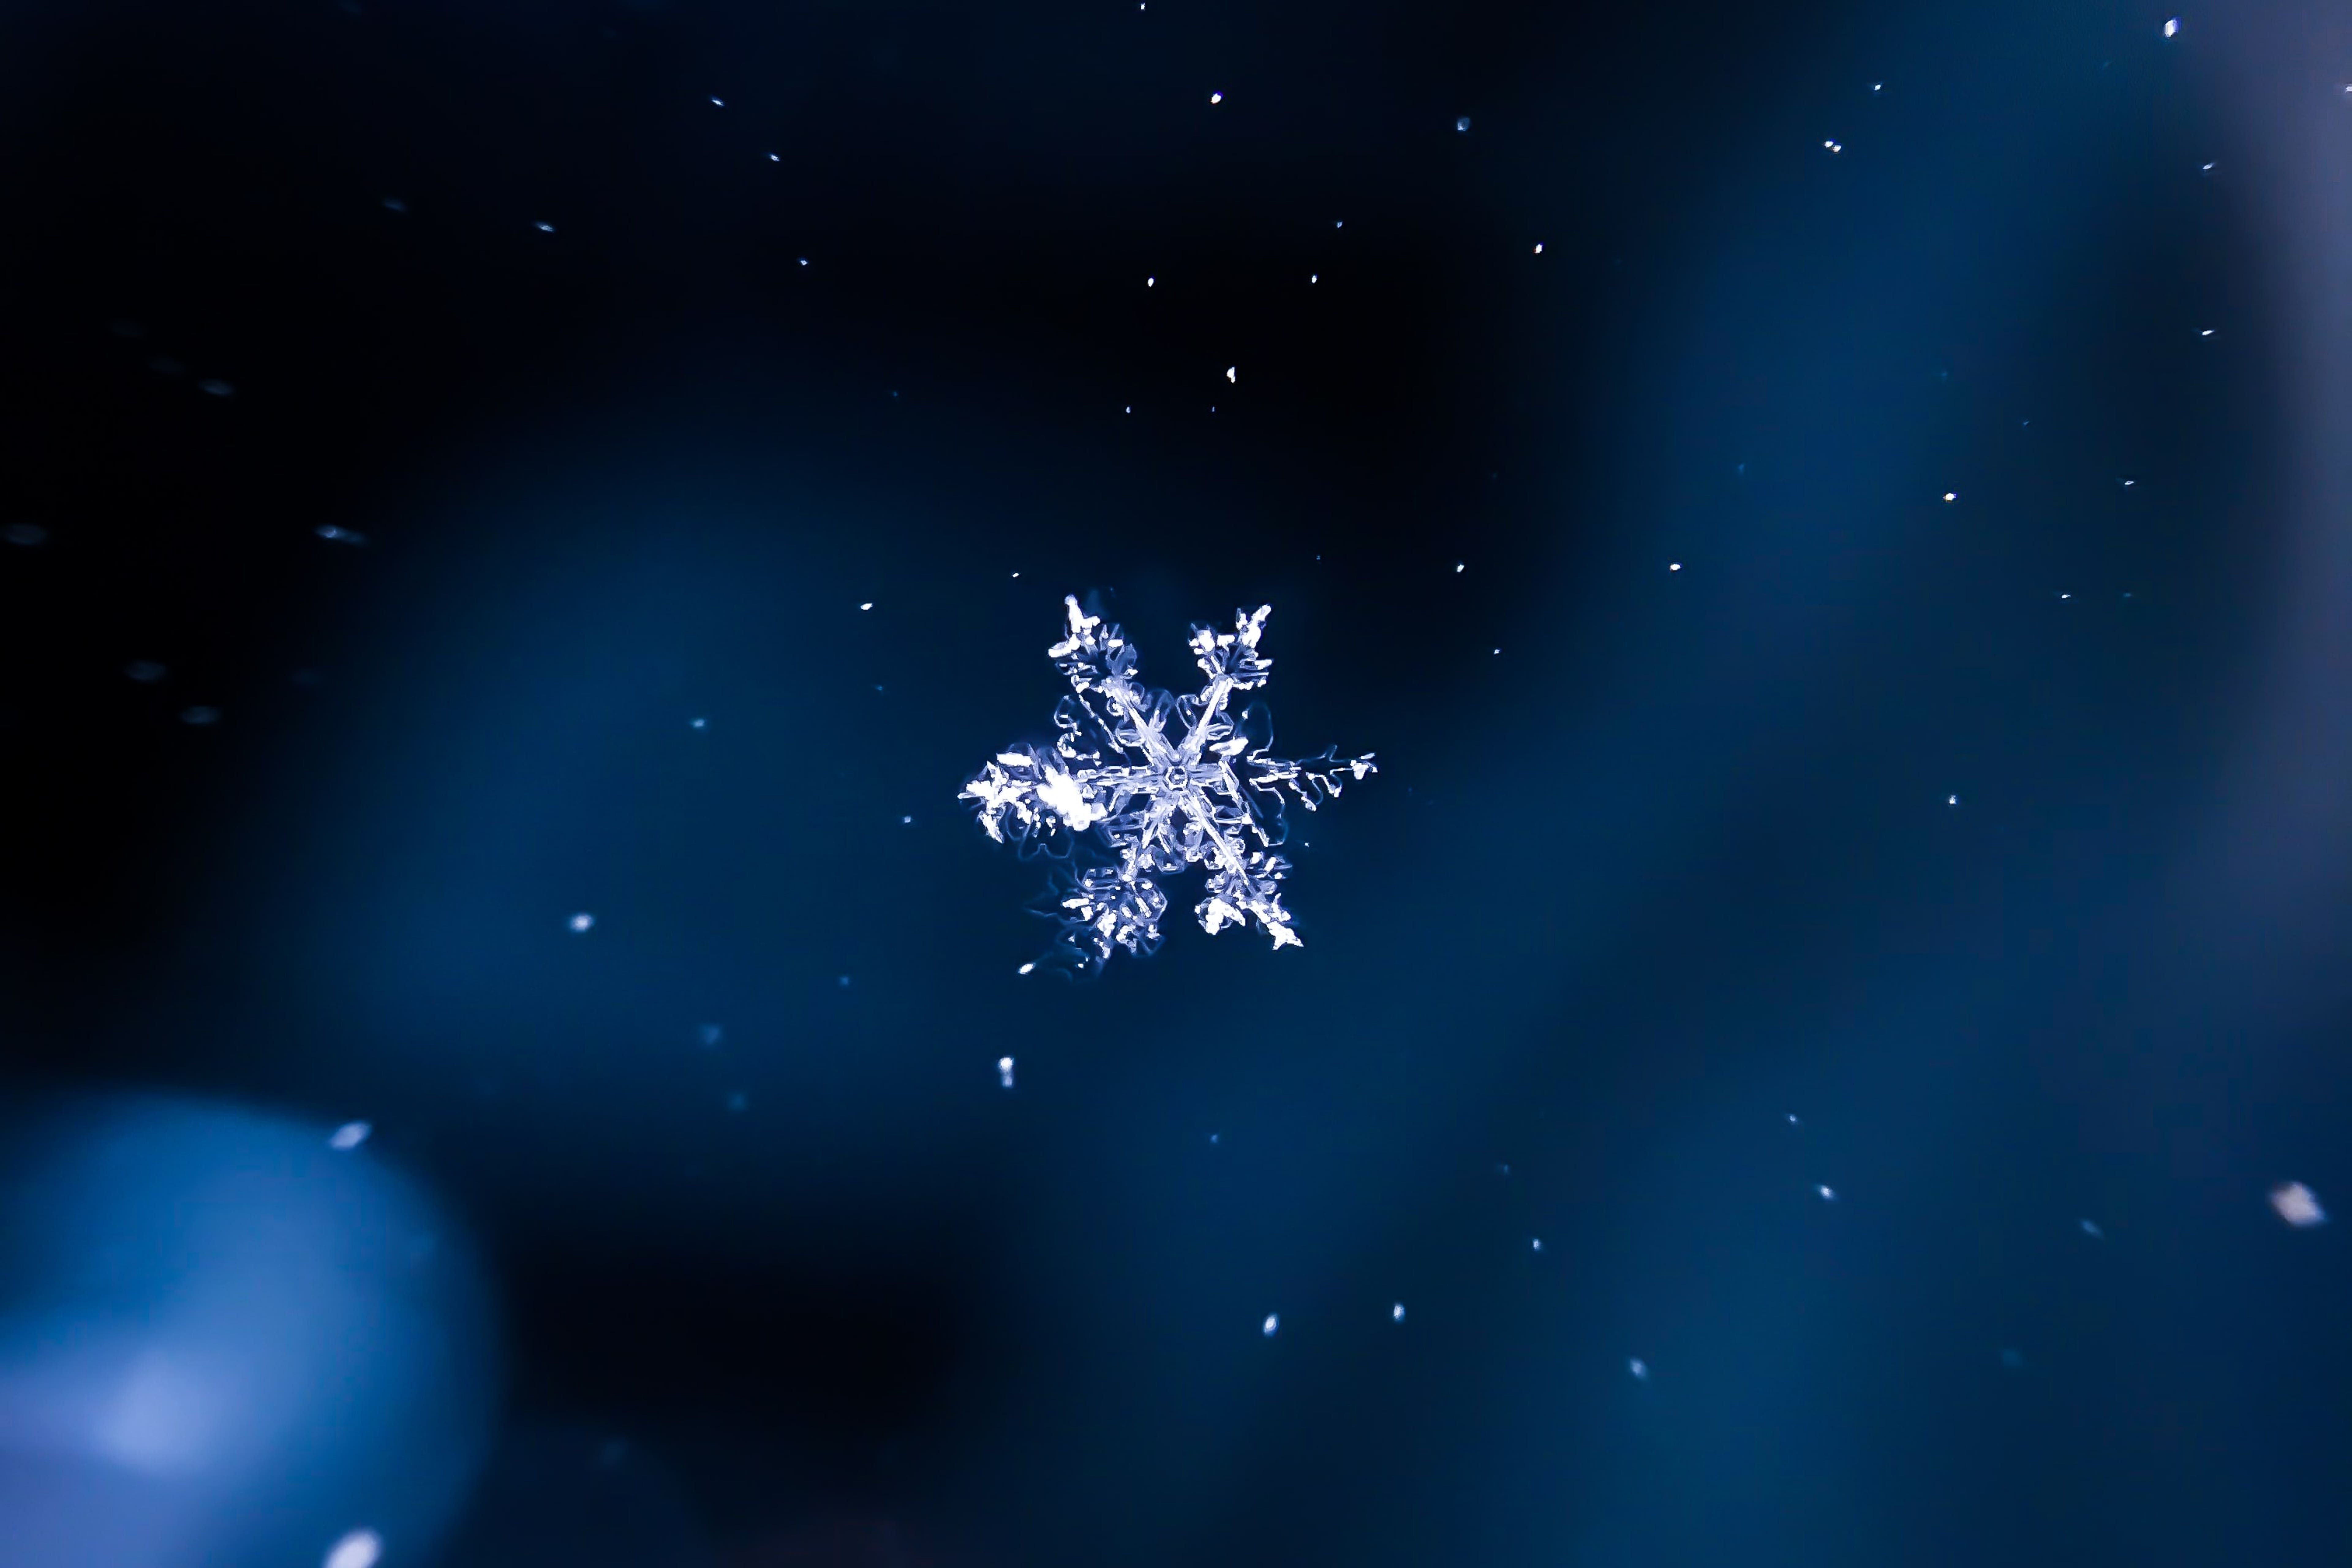 Goldman Sachs Upgrades Snowflake: What Investors Need To Know